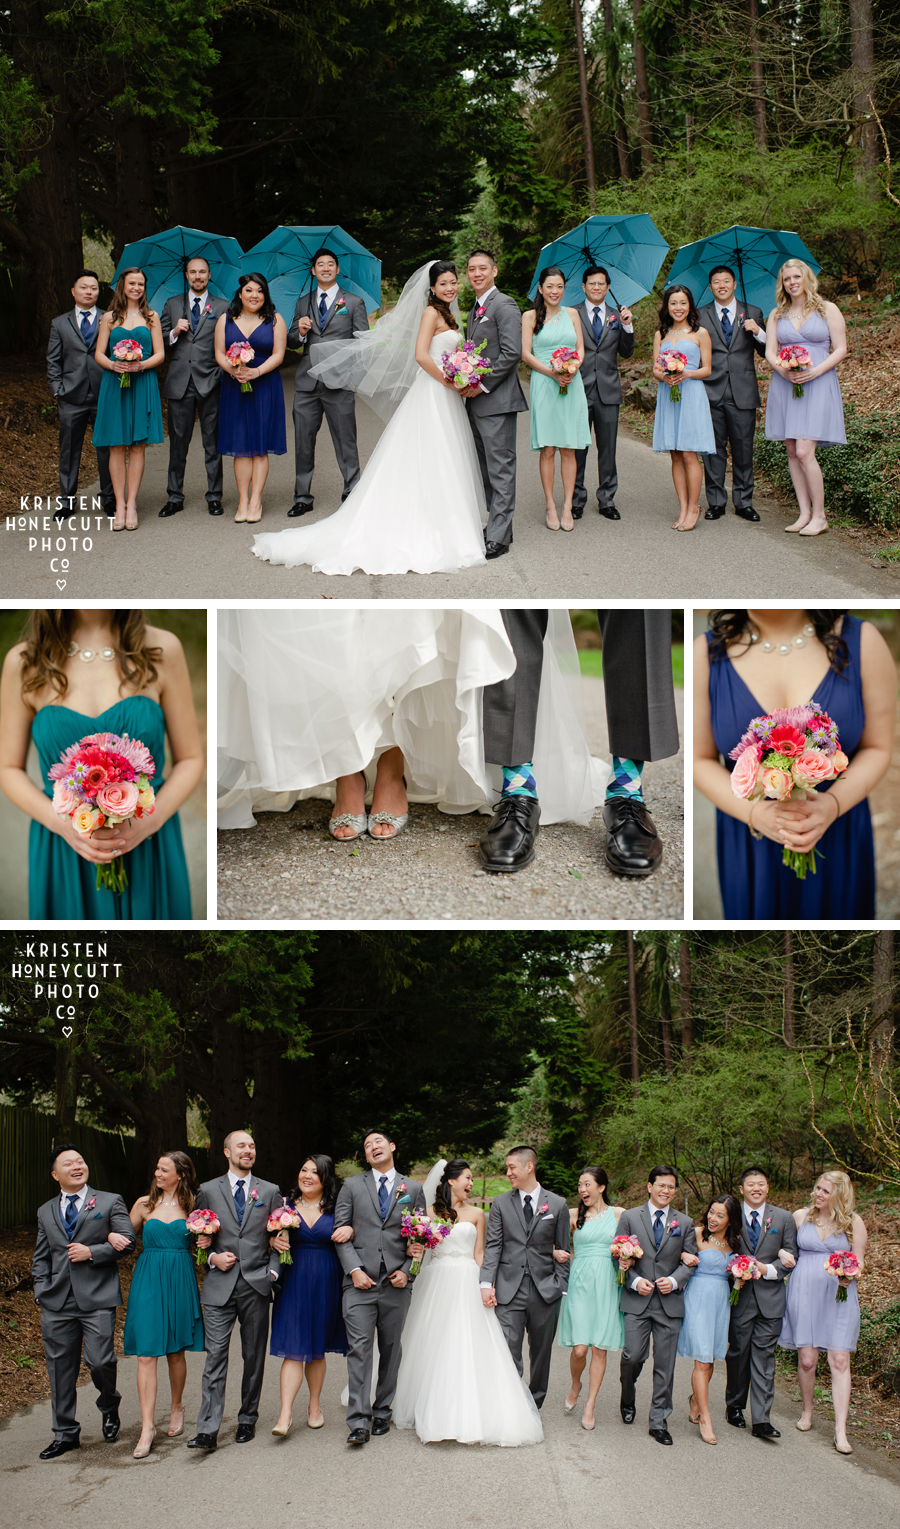 Wedding party photographed in Seattle's Arboretum with bright turquoise umbrellas and stunning pops of color for a spring wedding.